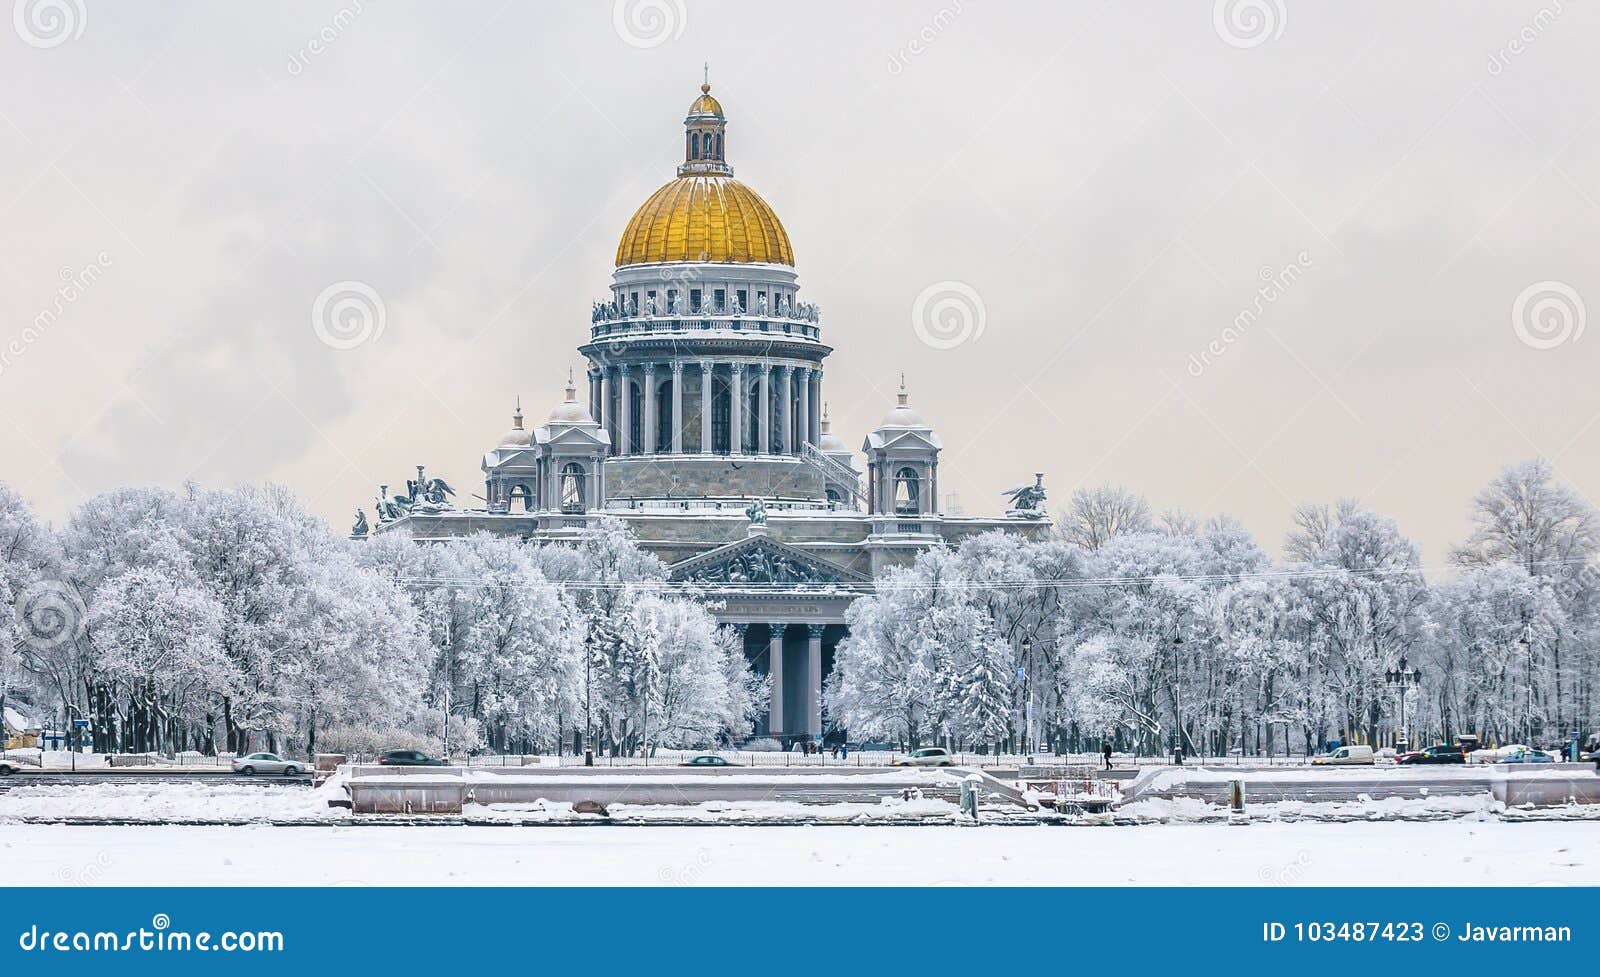 saint isaac`s cathedral in winter, saint petersburg, russia